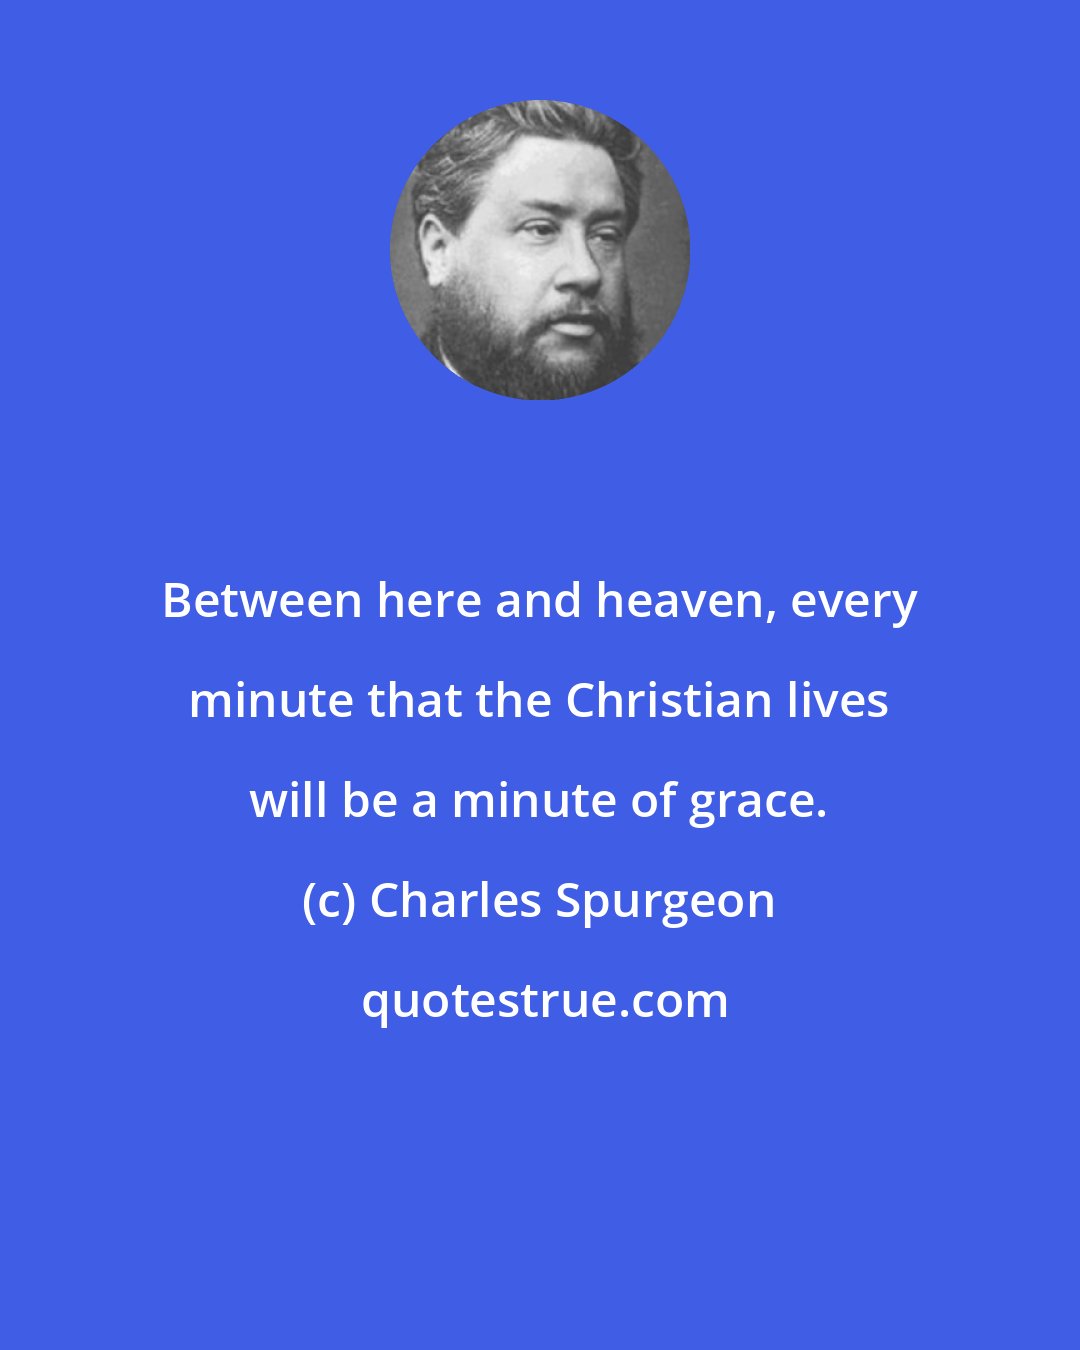 Charles Spurgeon: Between here and heaven, every minute that the Christian lives will be a minute of grace.